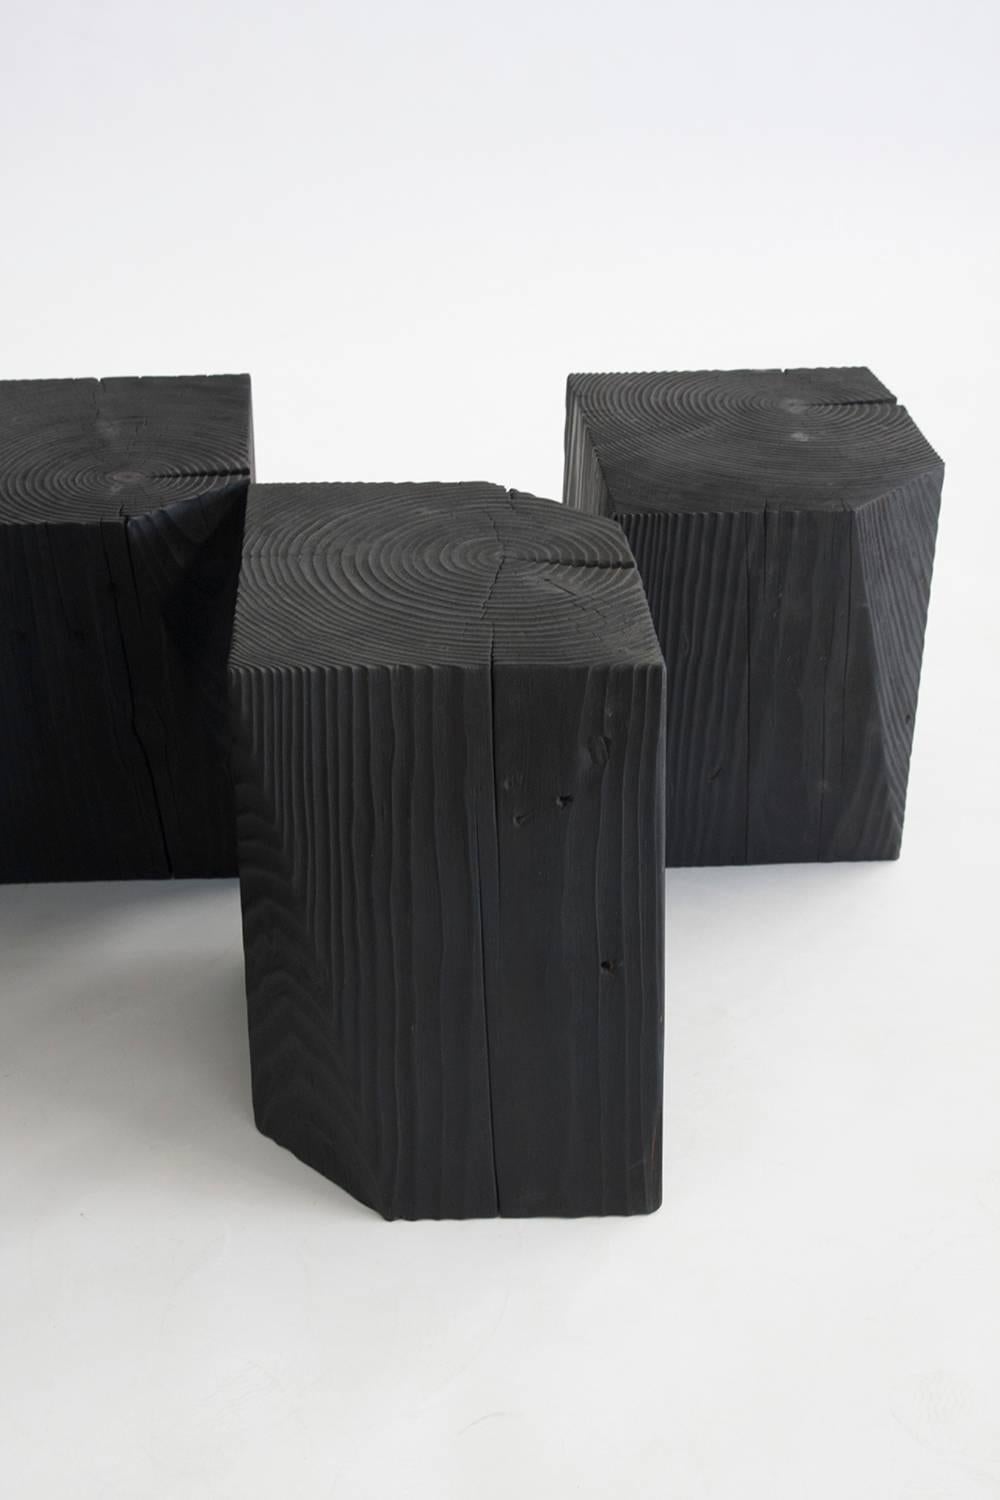 American Charcoal Blocks, Sculptural, Geometric, Shou Sugi Ban Coffee or Side Tables For Sale